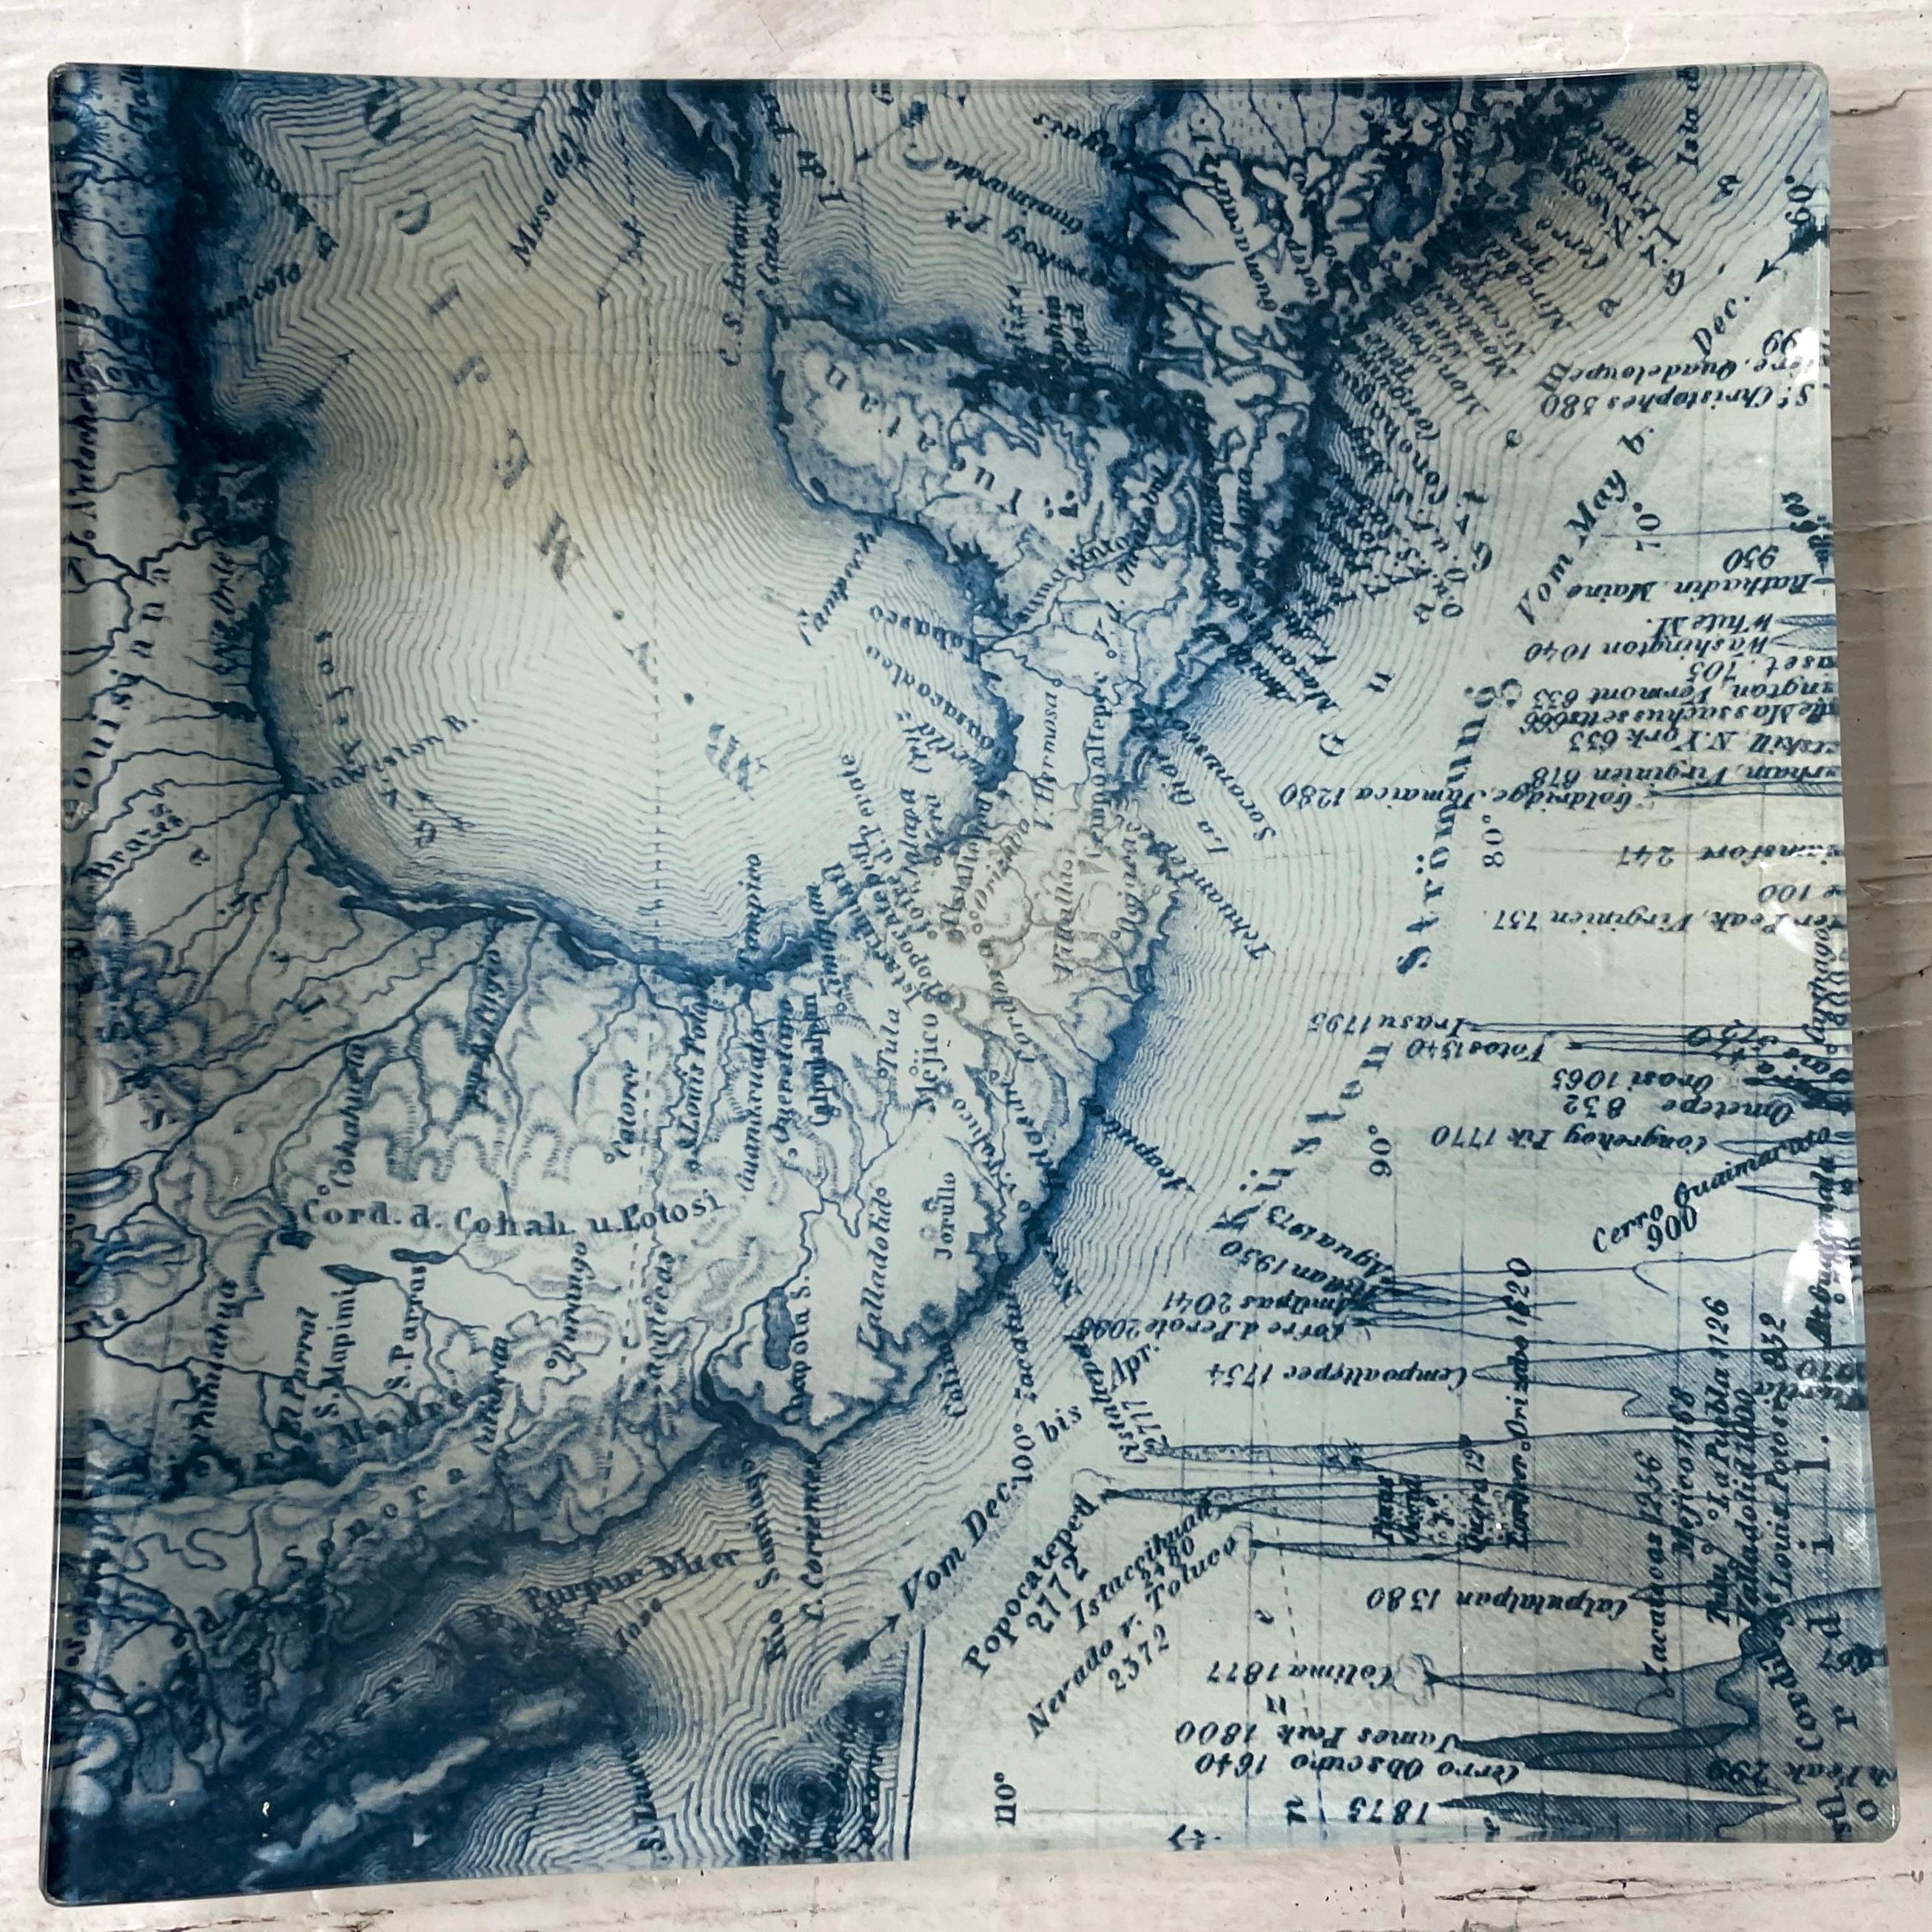 Blue and white map glass vide poche plate. Contemporary glass plate with print of antique map of the Gulf of Mexico United States, 20th century.
Dimensions: 9